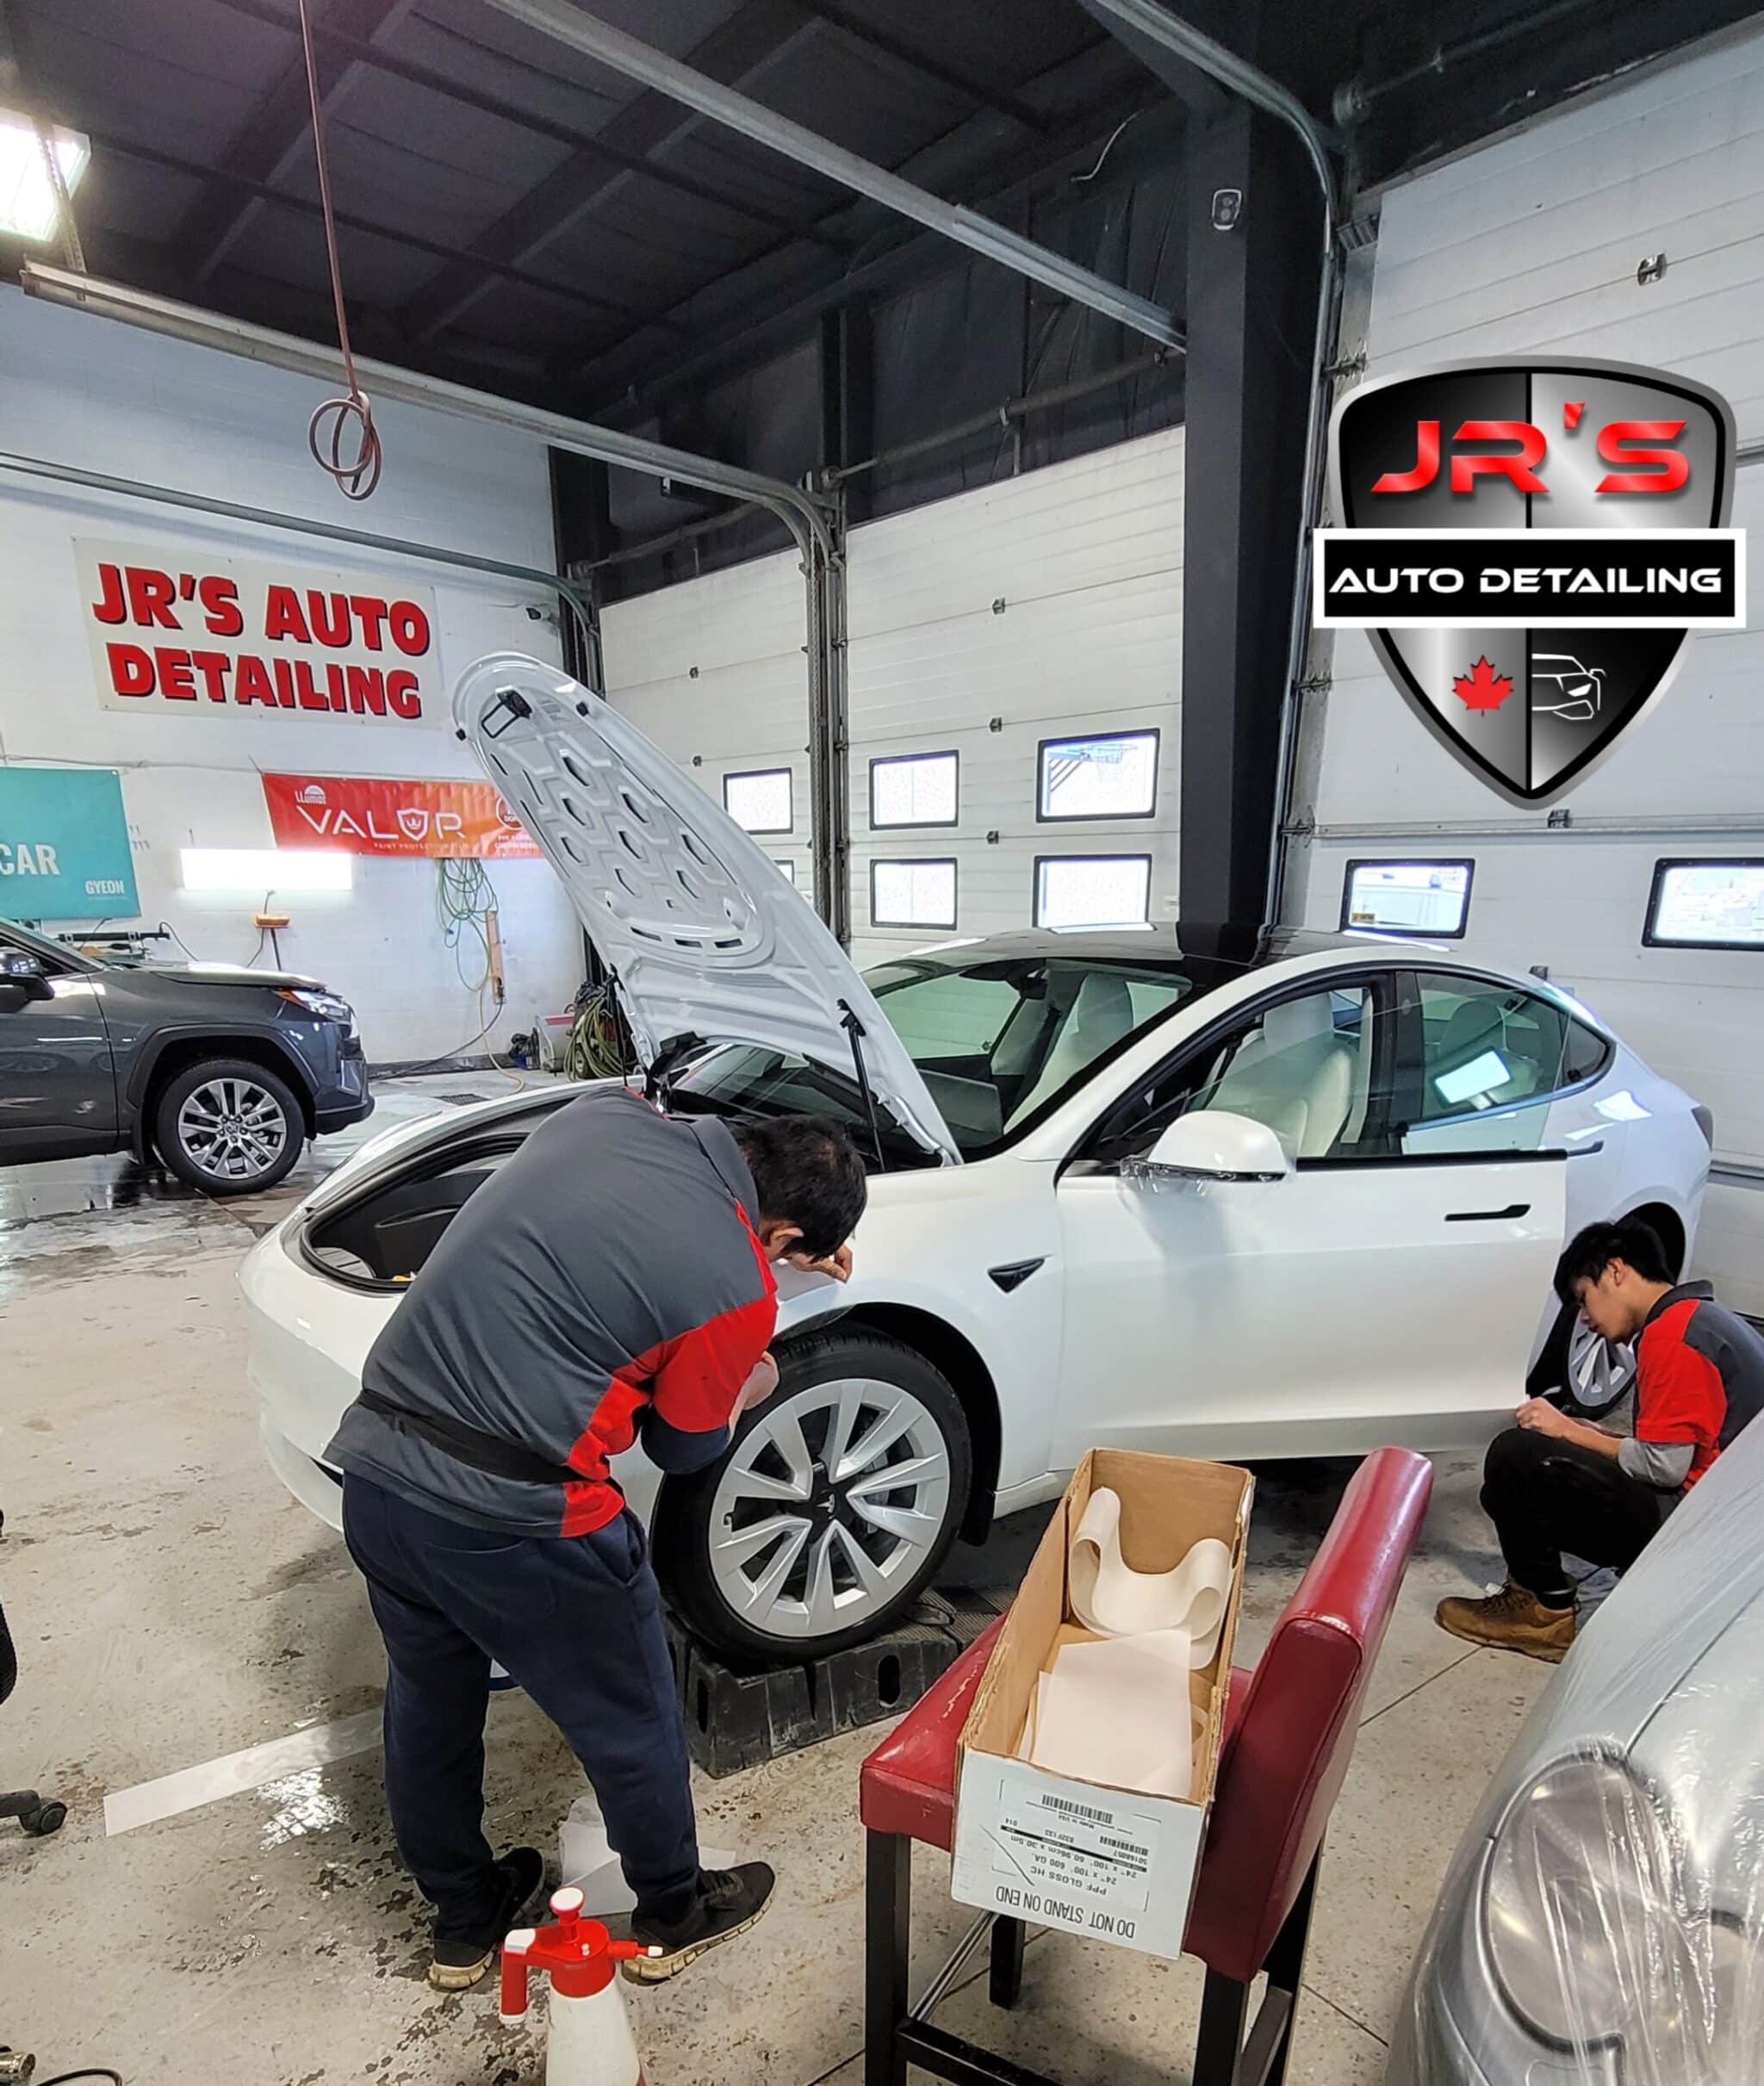 Blog - Tips And Trends In Auto Detailing | Jrs Auto